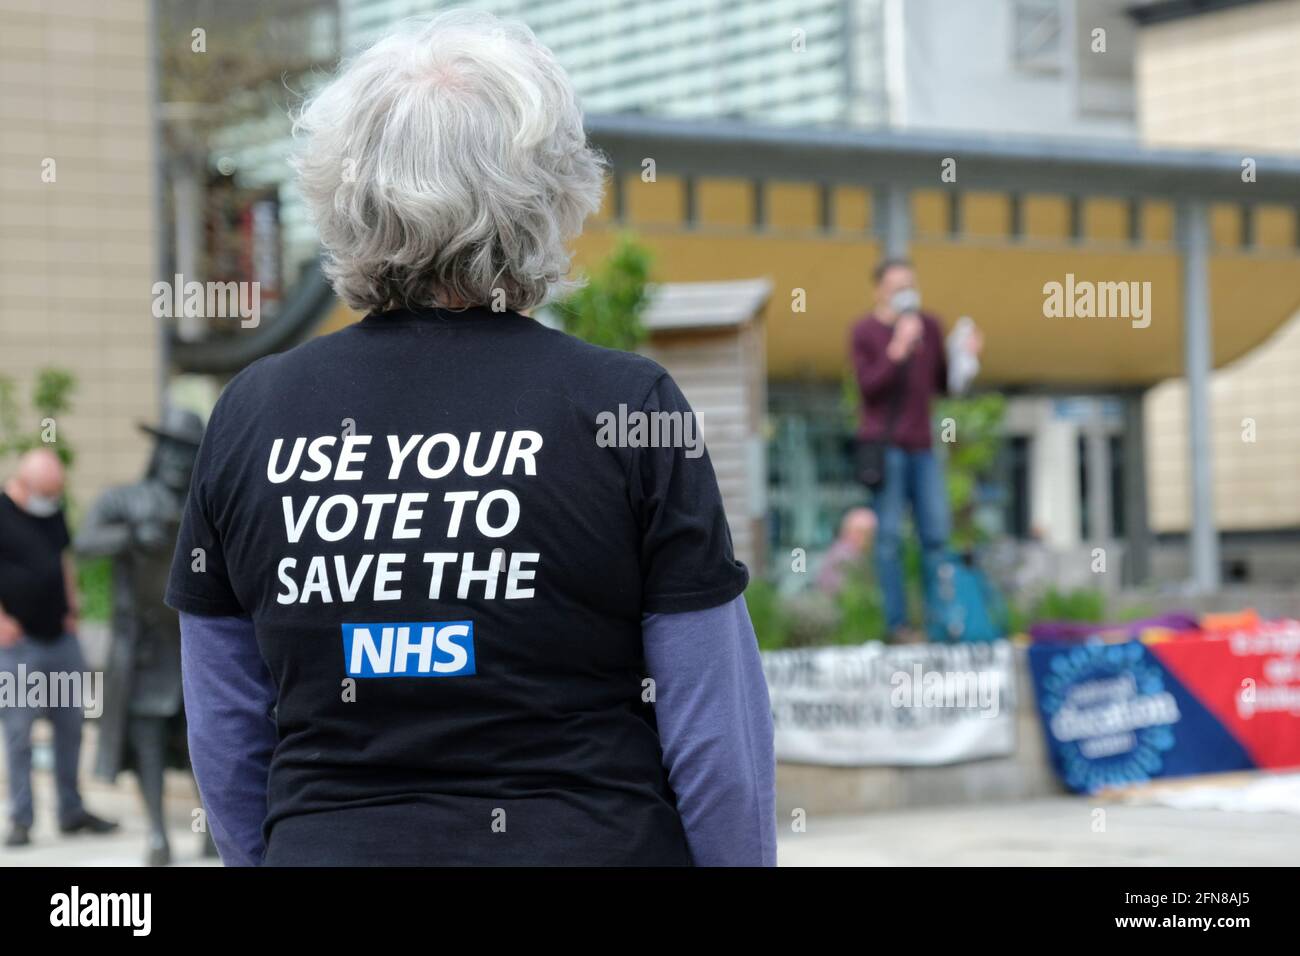 Bristol, UK. 15th May, 2021. The group “NHS Workers say no” met in Millenium Square Bristol to protest their poor pay. They want a 15% restorative pay rise to make up for years of austerity. Credit: JMF News/Alamy Live News Stock Photo